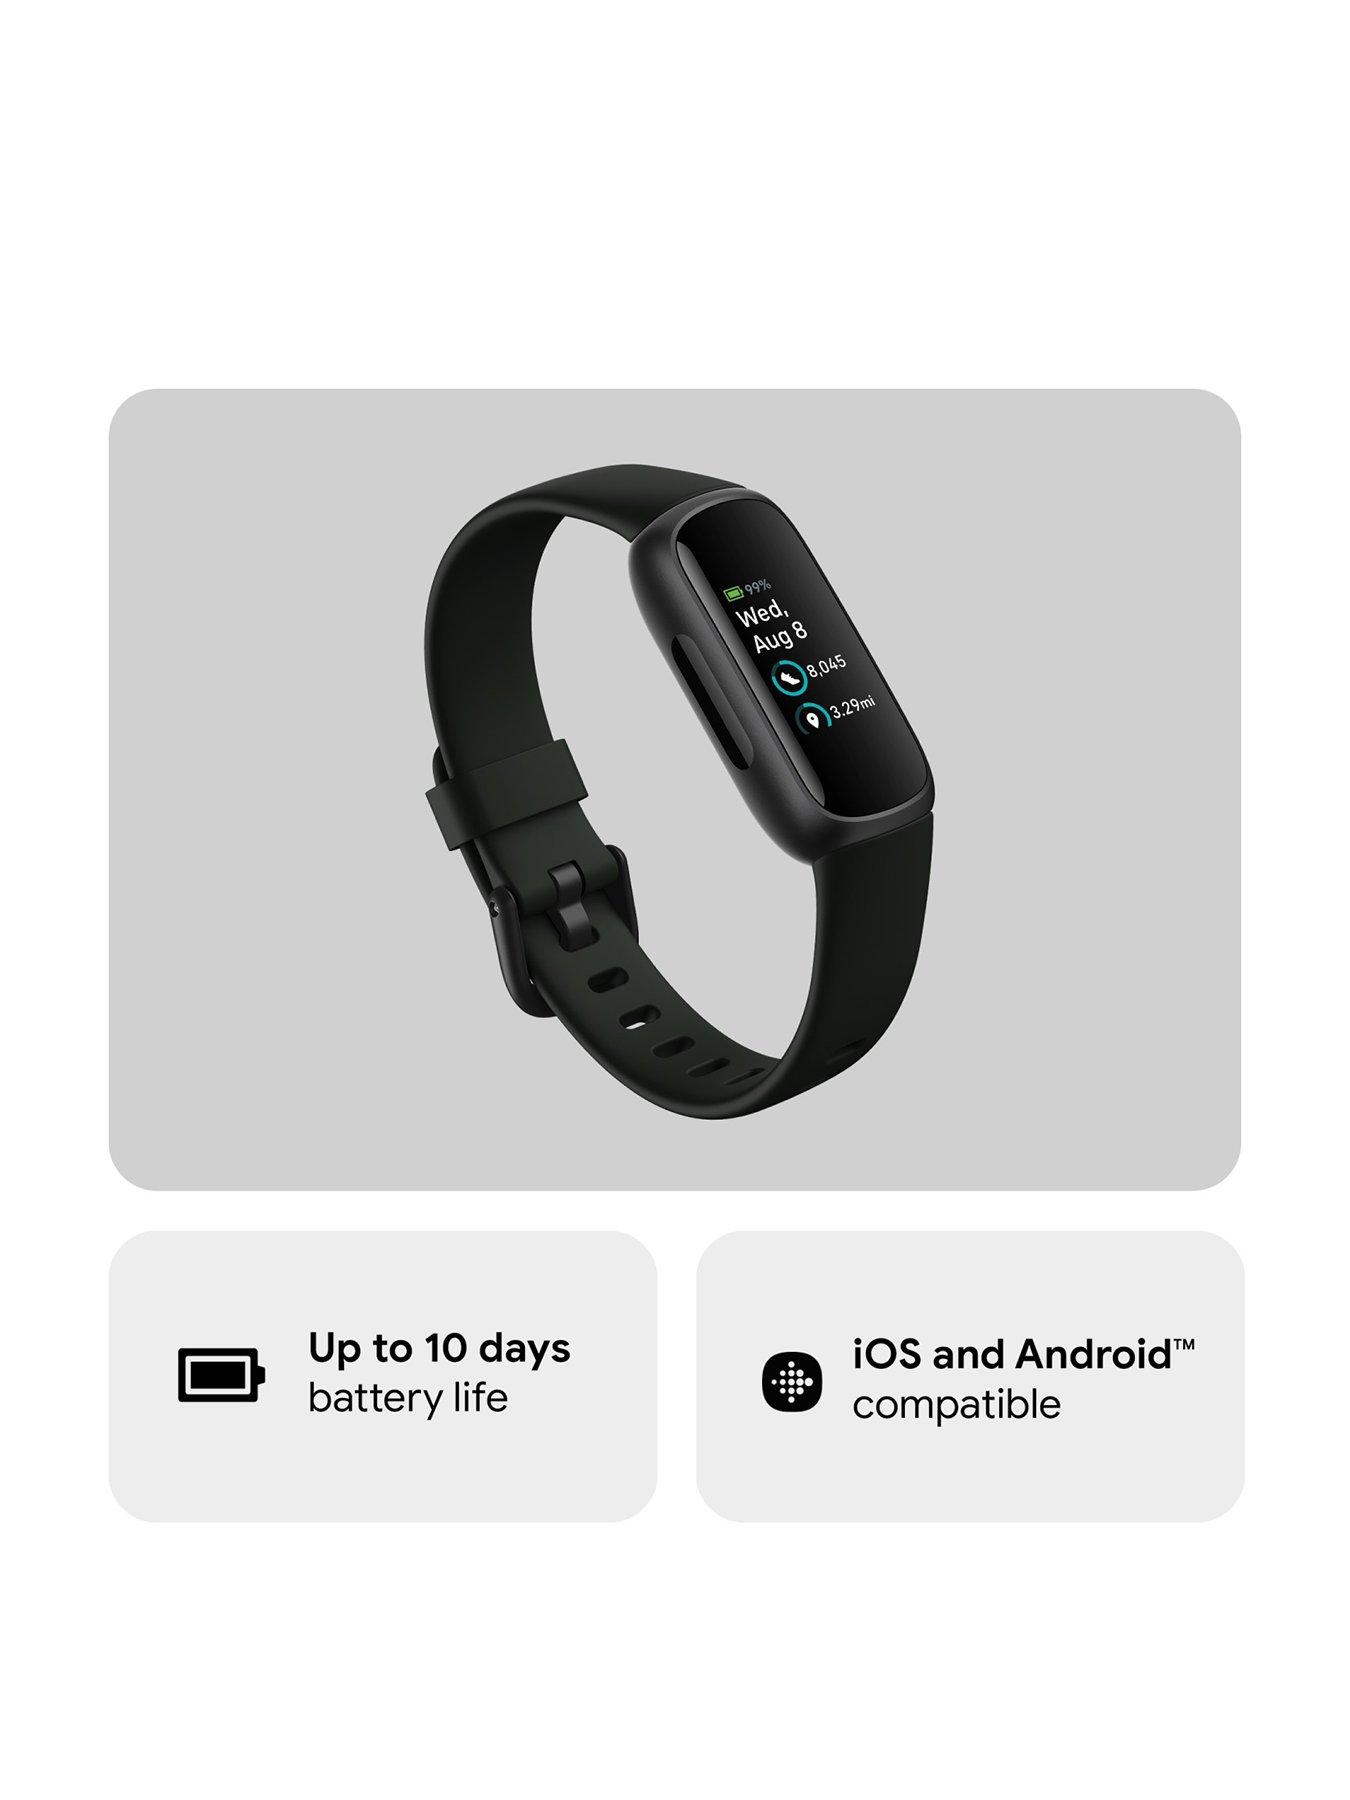 Inspire 3 - Black/Midnight Zen Health and Fitness Tracker with up to  10-days battery life. Android and iOS compatible